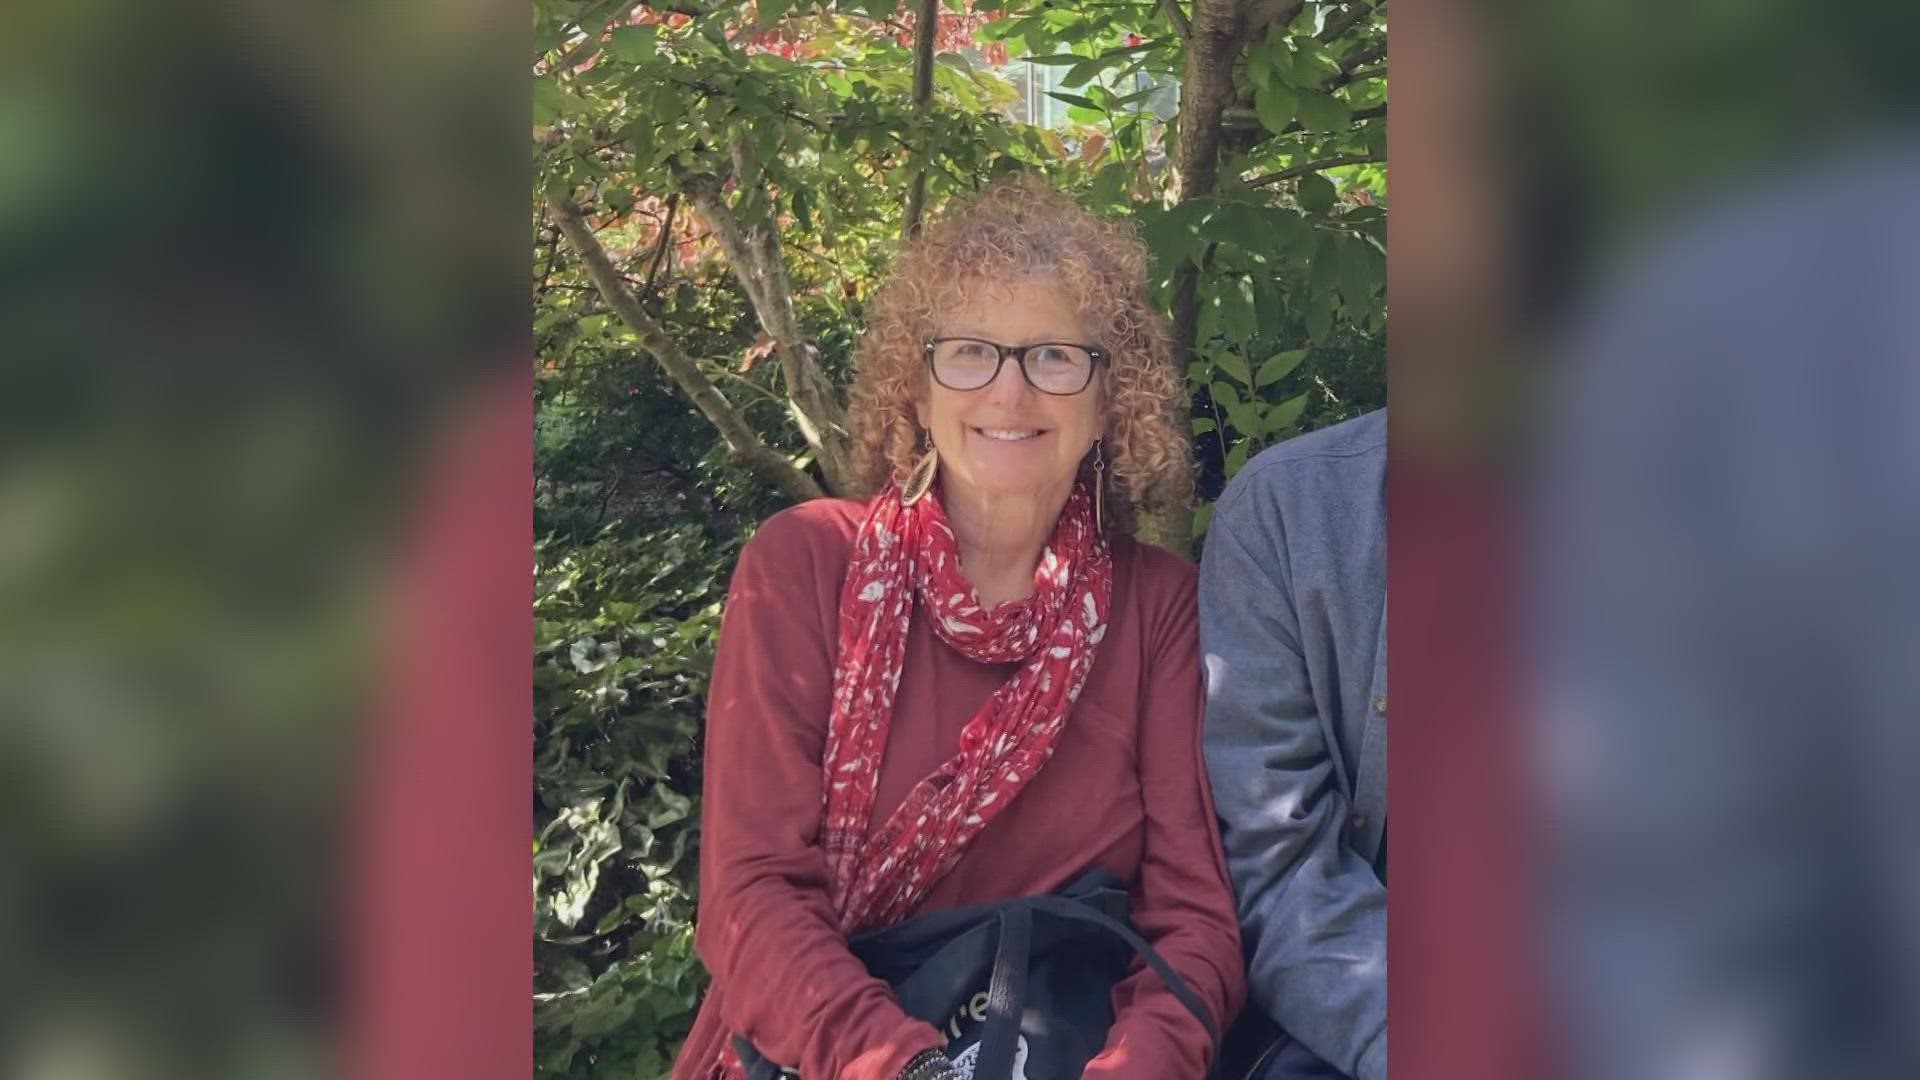 Francine Laporte was reported missing after her husband woke up to find her gone on Wednesday.